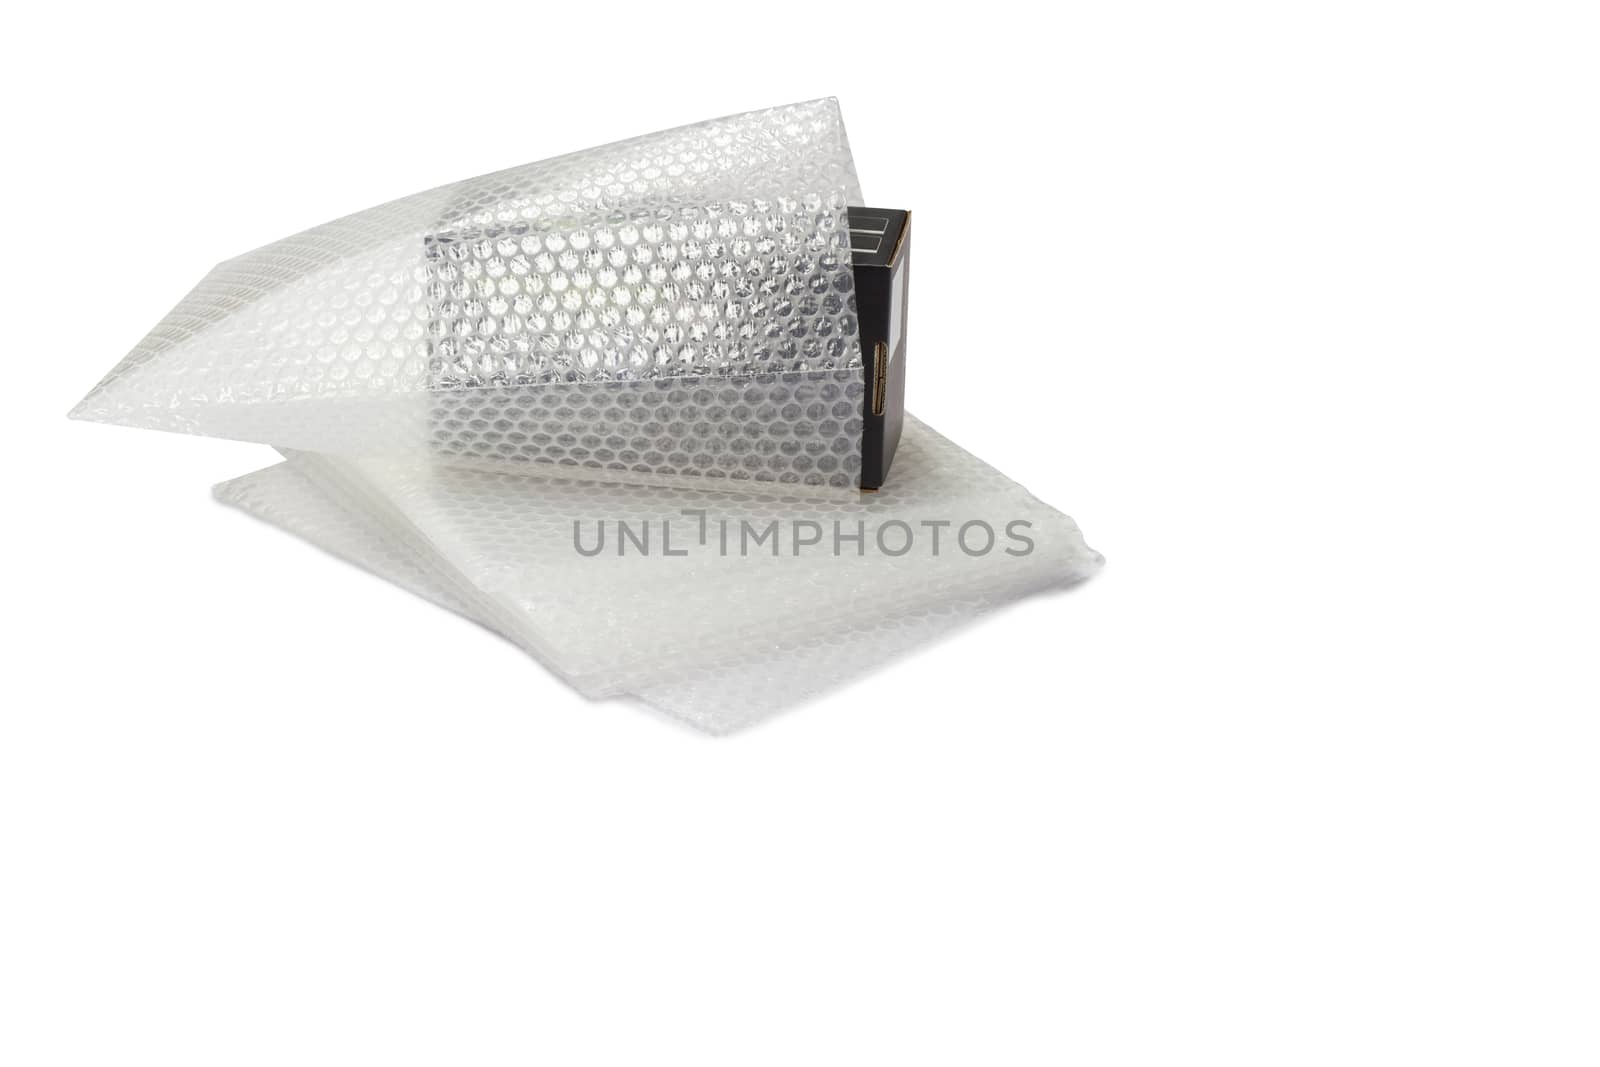 bubble wrap, for protection product cracked  or insurance During transit isolated and white background by piyaphun